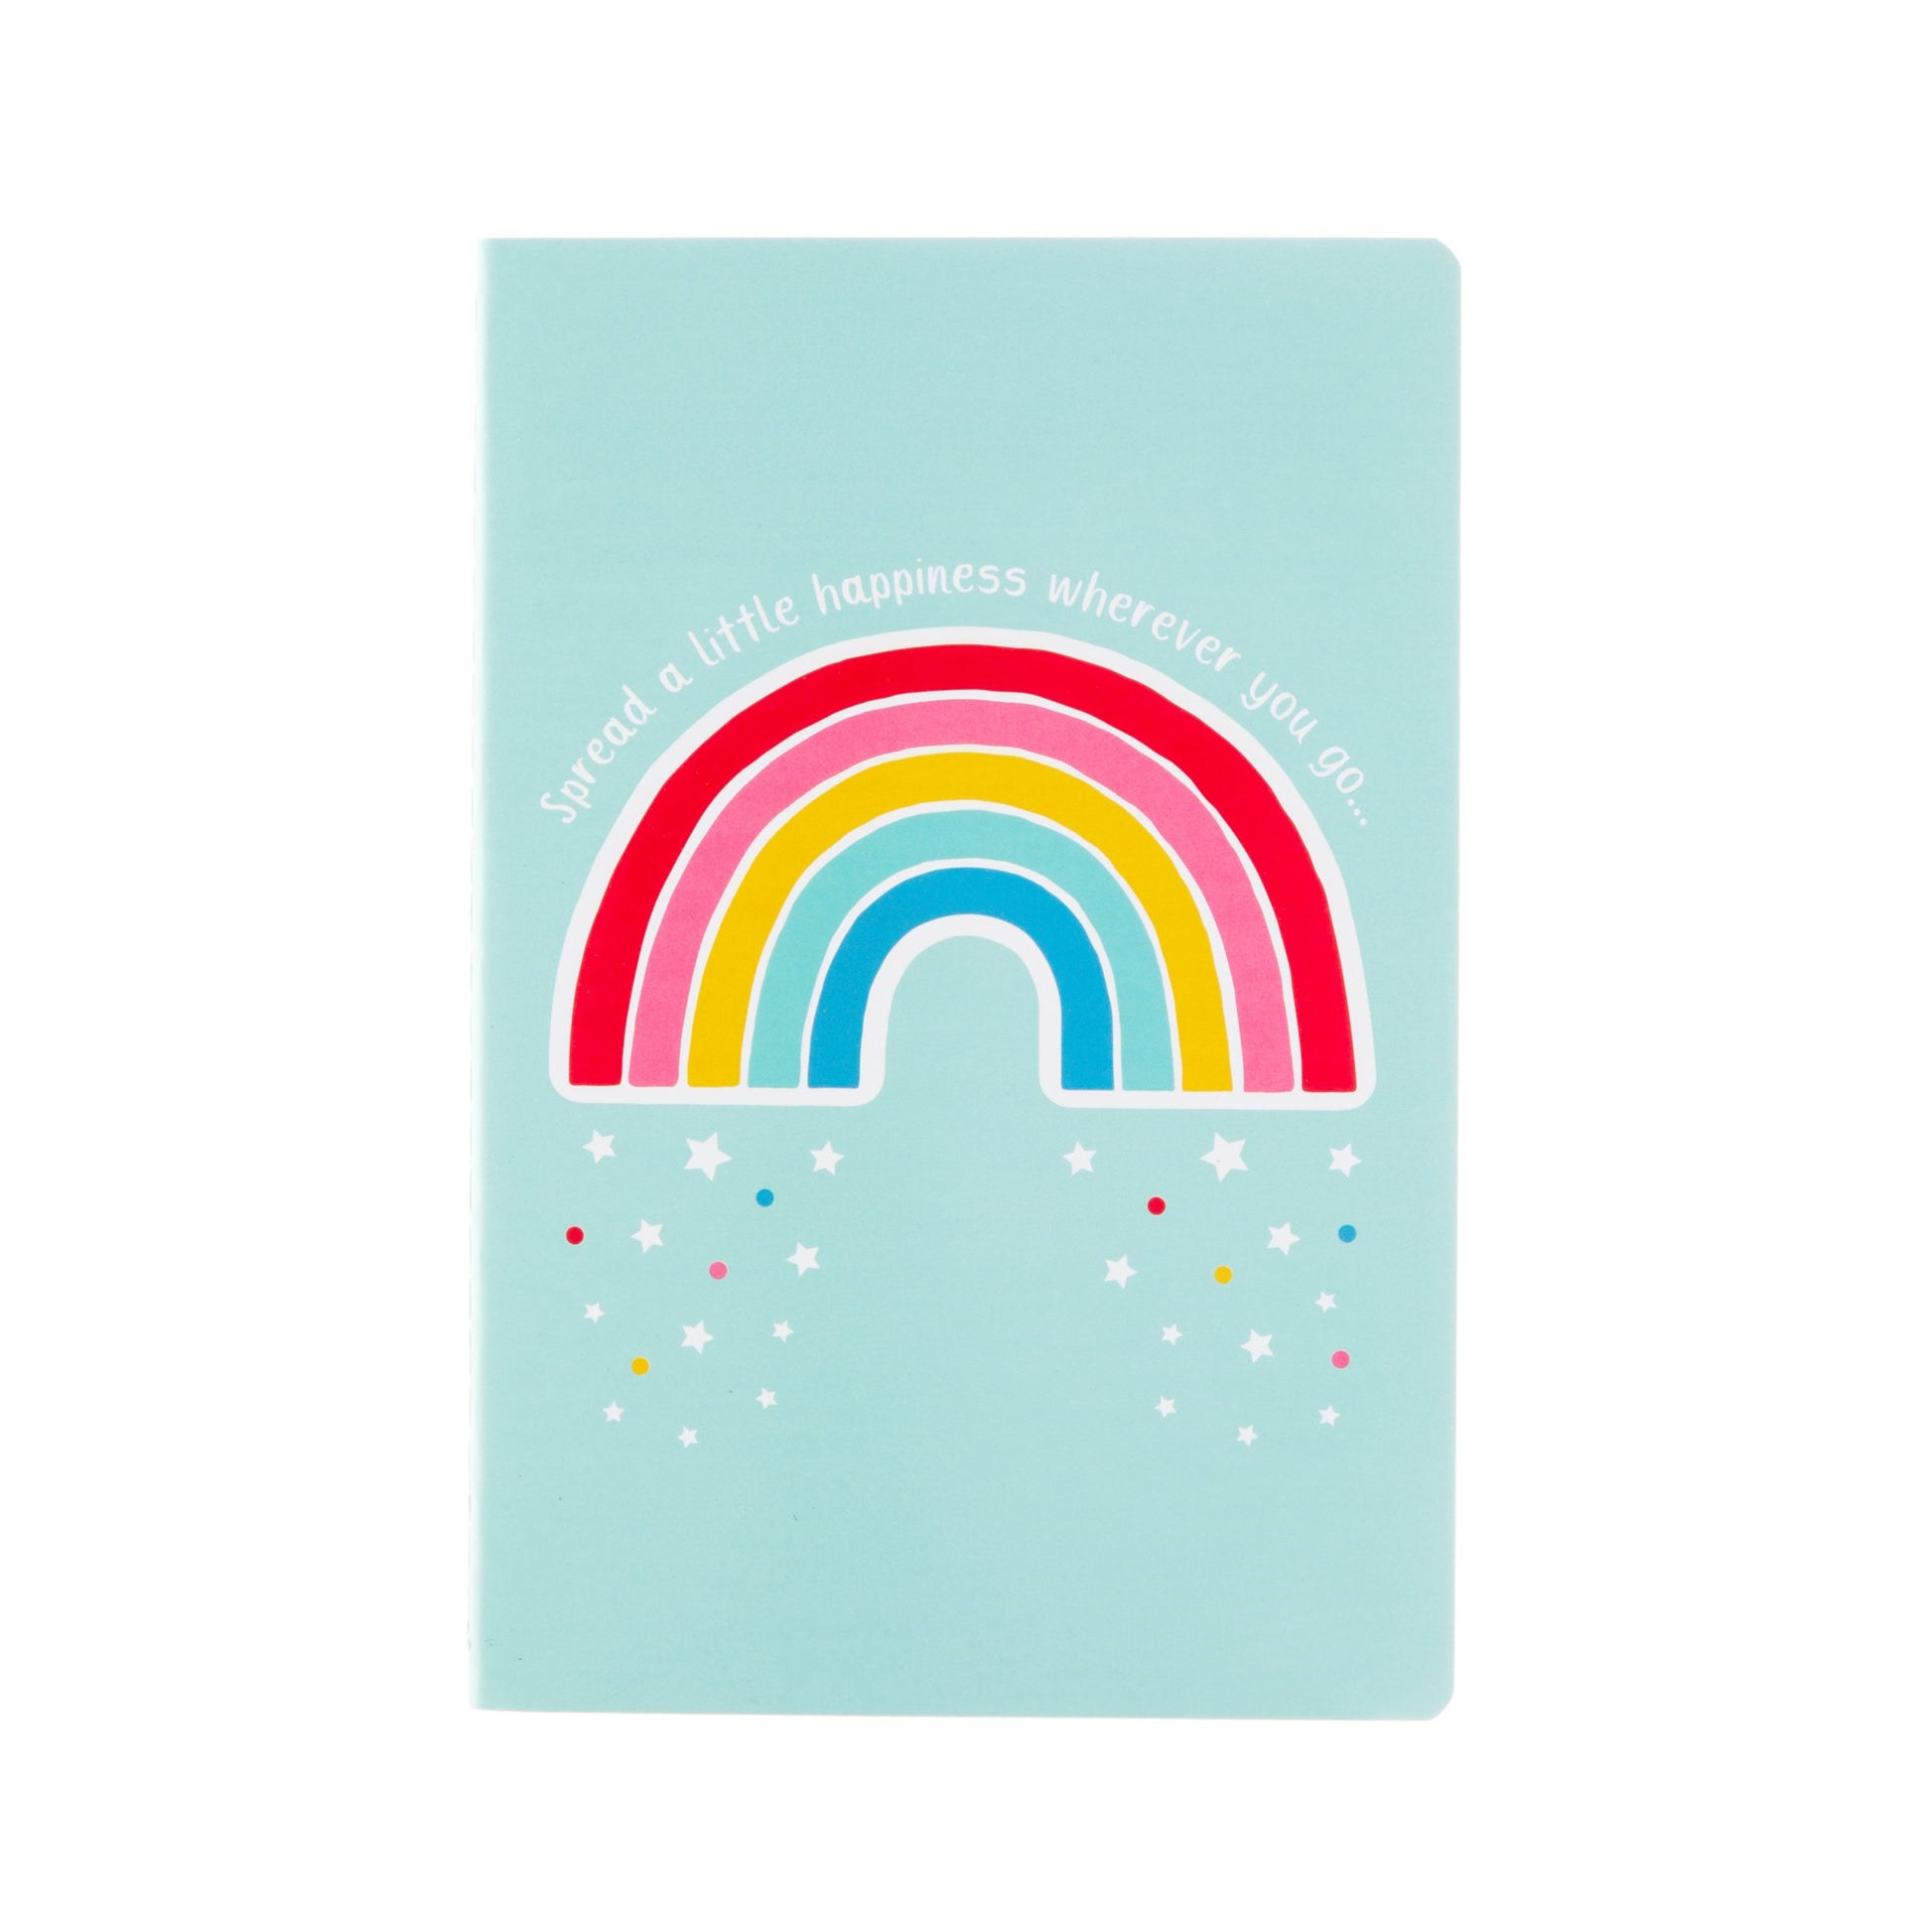 Rainbow notebook with slogan spread a little happiness wherever you go